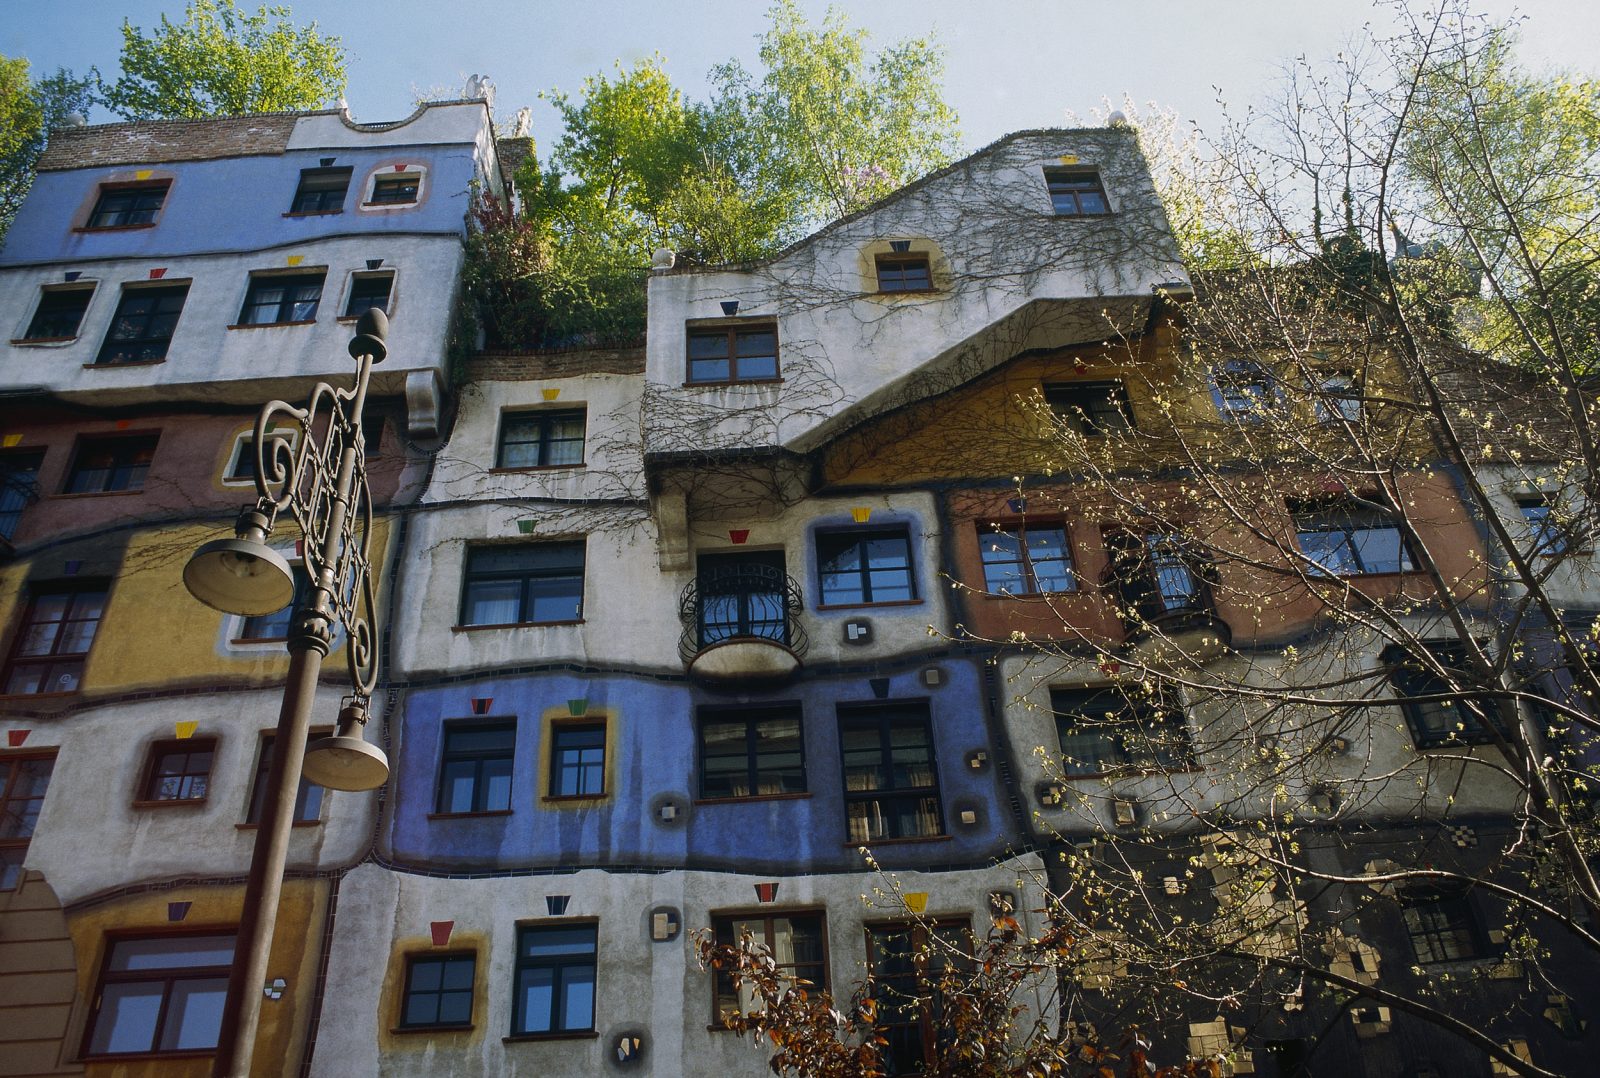 Hundertwasser House. Copyright: Oesterreich Werbung. For fanatics of Architecture, plan your multi-stop visit to Austria post Covid19.